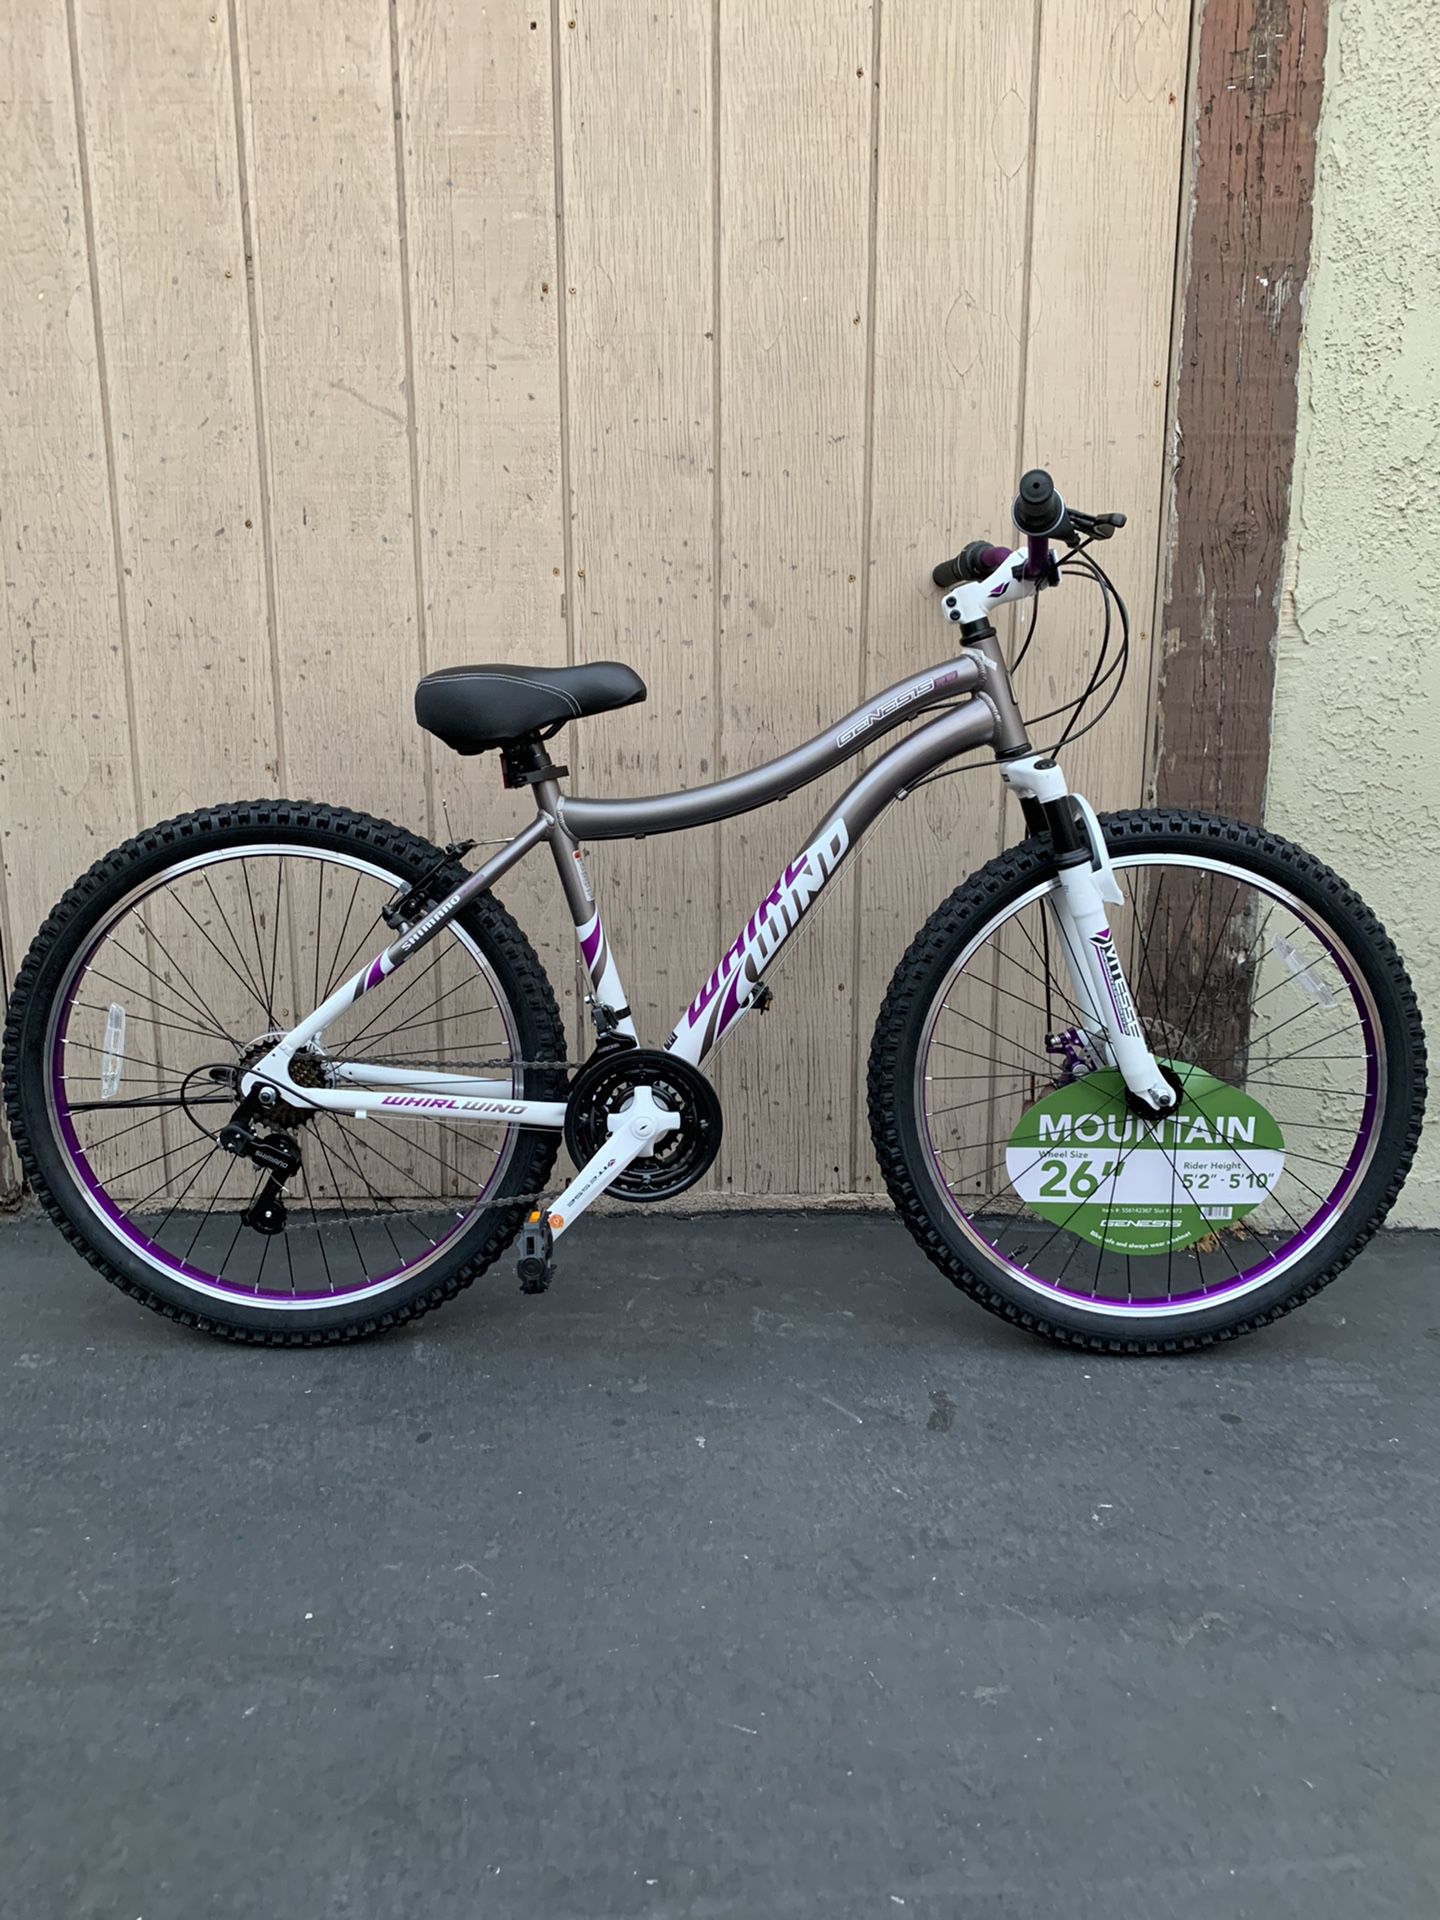 ALL ALUMINUM WOMENS 26” GENESIS MOUNTAIN BIKE BRAND NEW WITH FRONT DISC BRAKE 21 SPEED EXTRA CUSHIONED SEAT 😍🔥